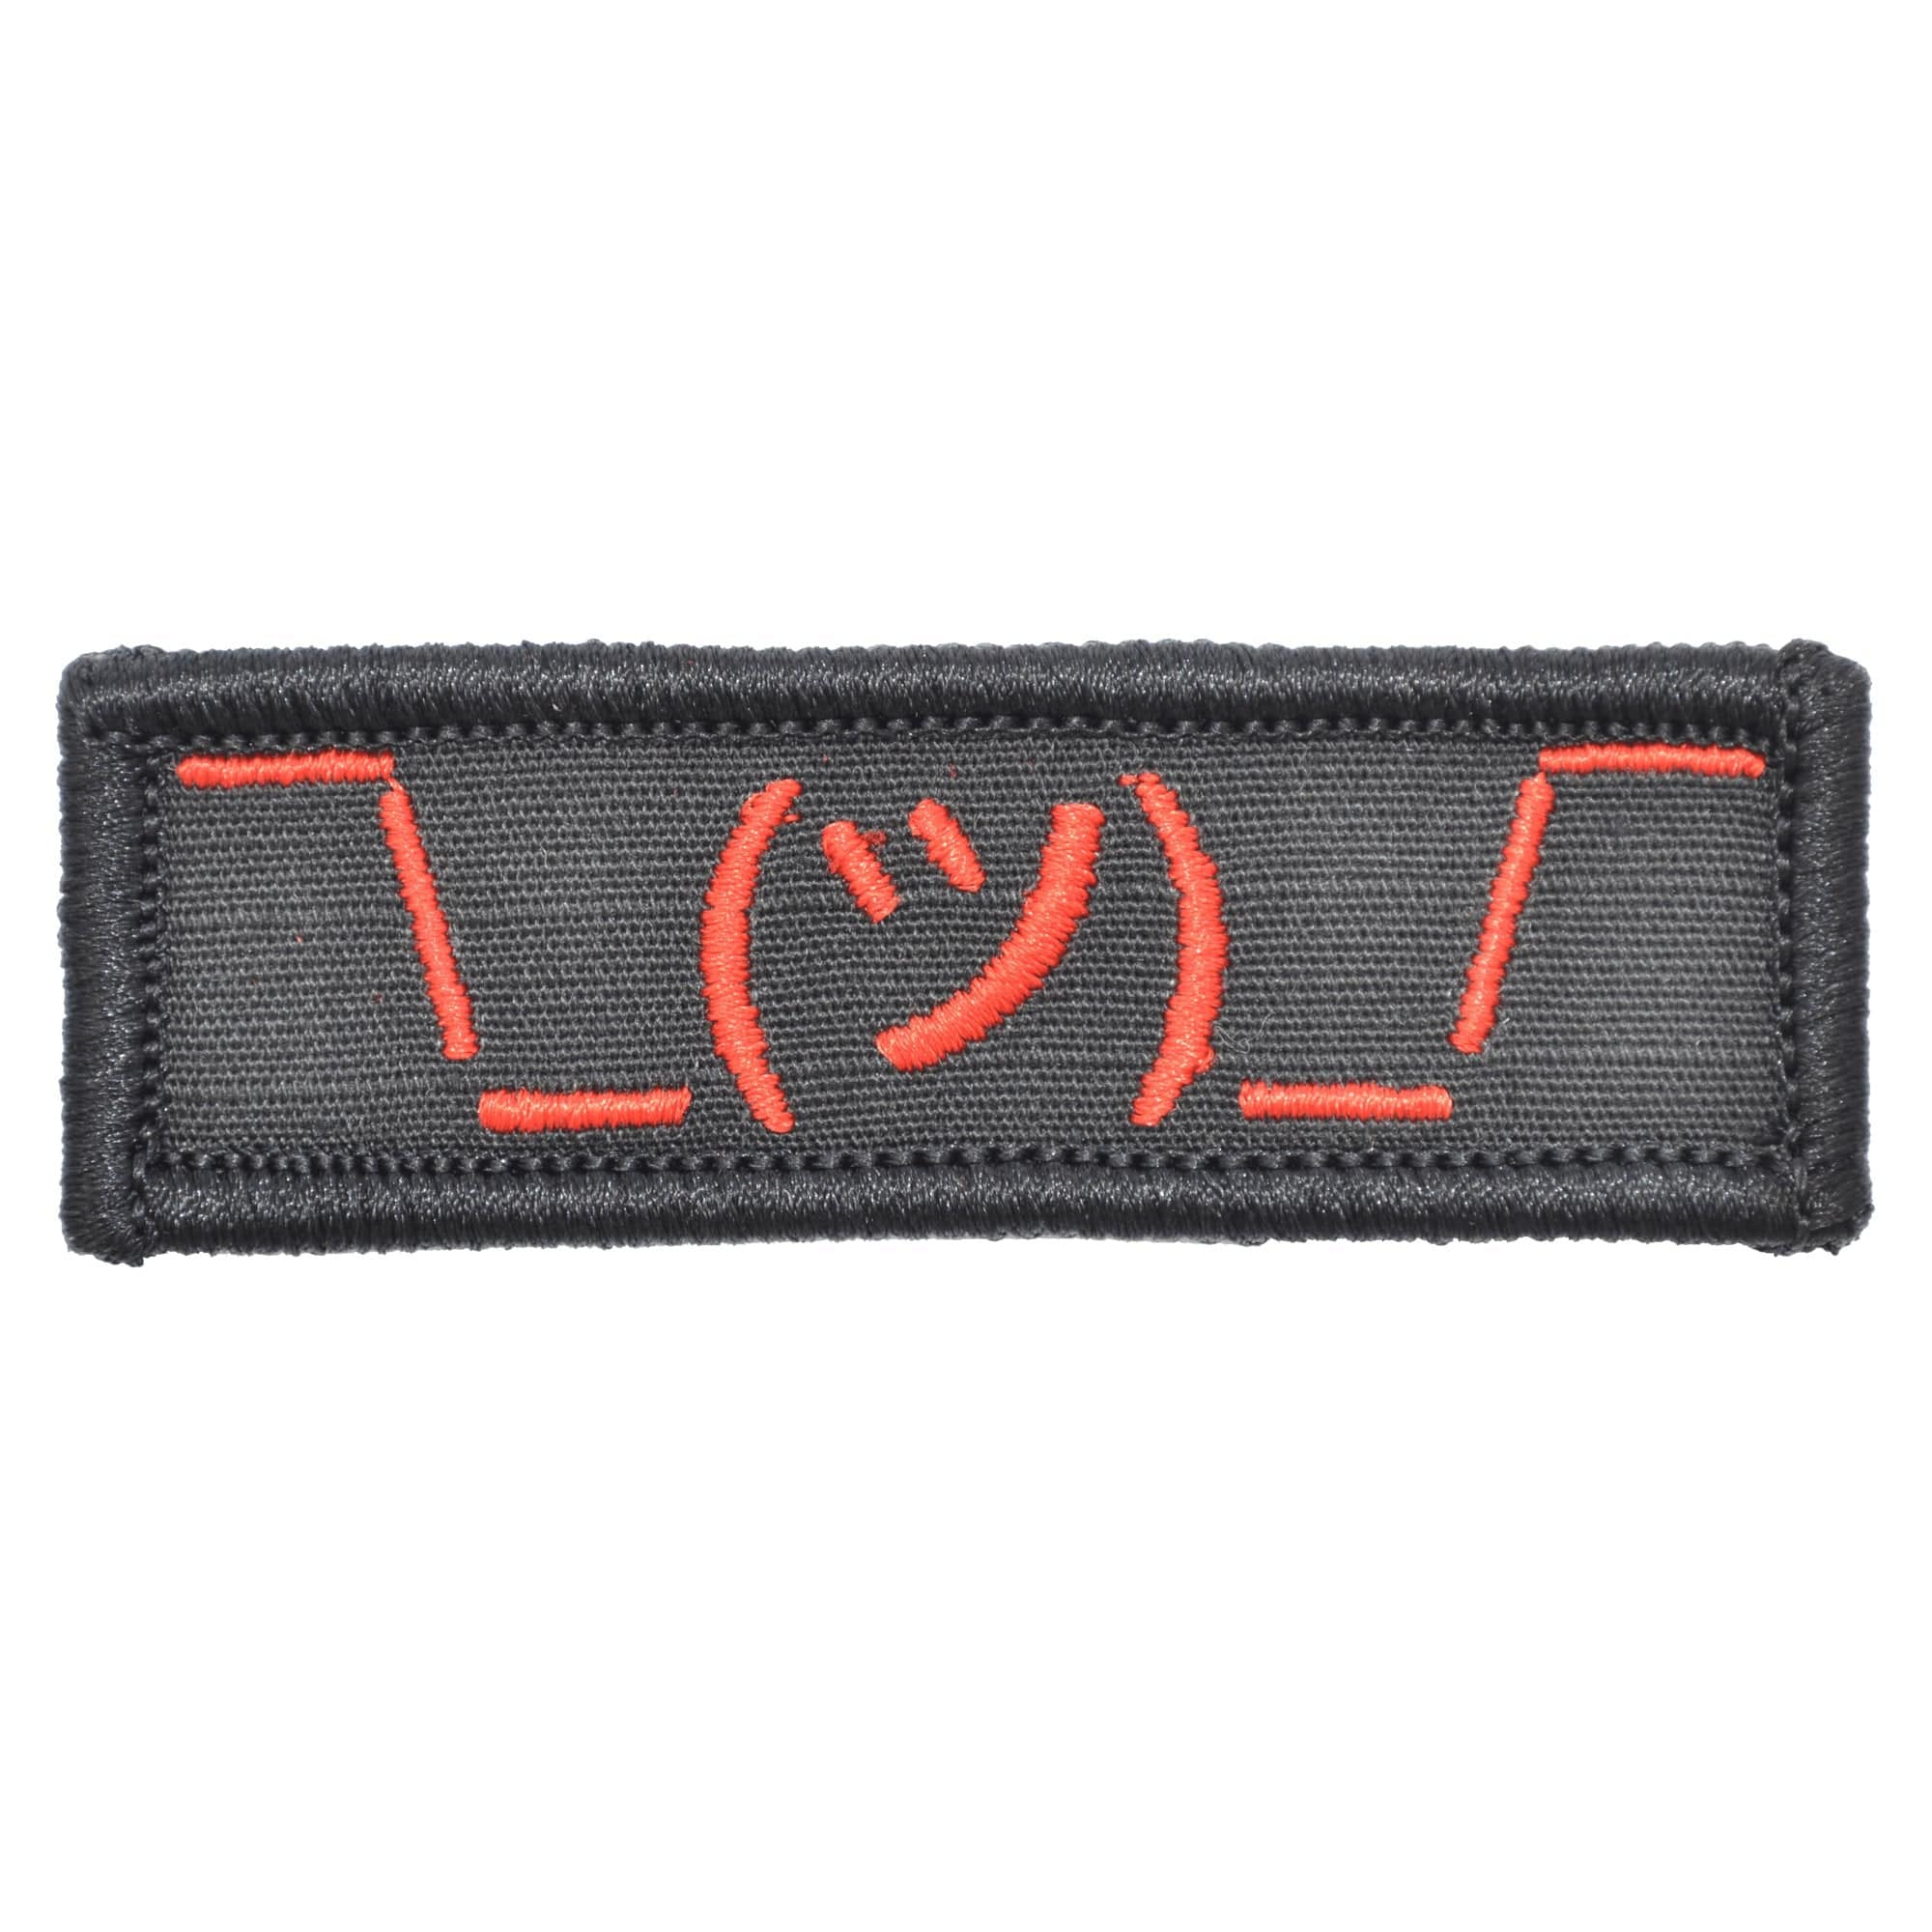 Tactical Gear Junkie Patches Black w/ Red Shrug Emoji - 1x3 Patch